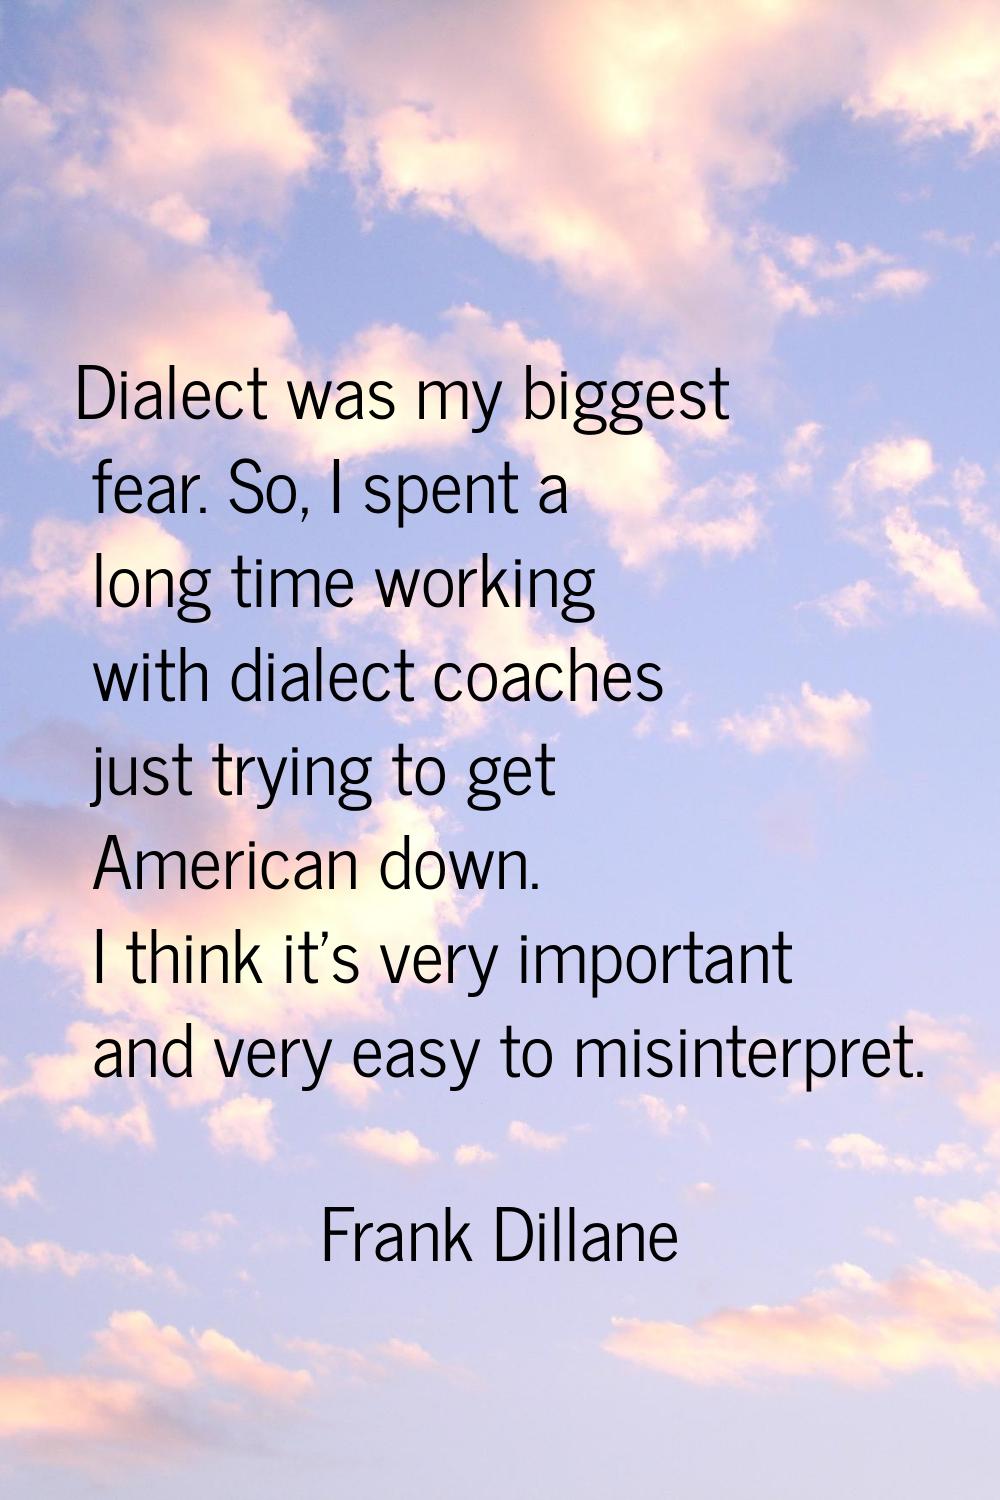 Dialect was my biggest fear. So, I spent a long time working with dialect coaches just trying to ge